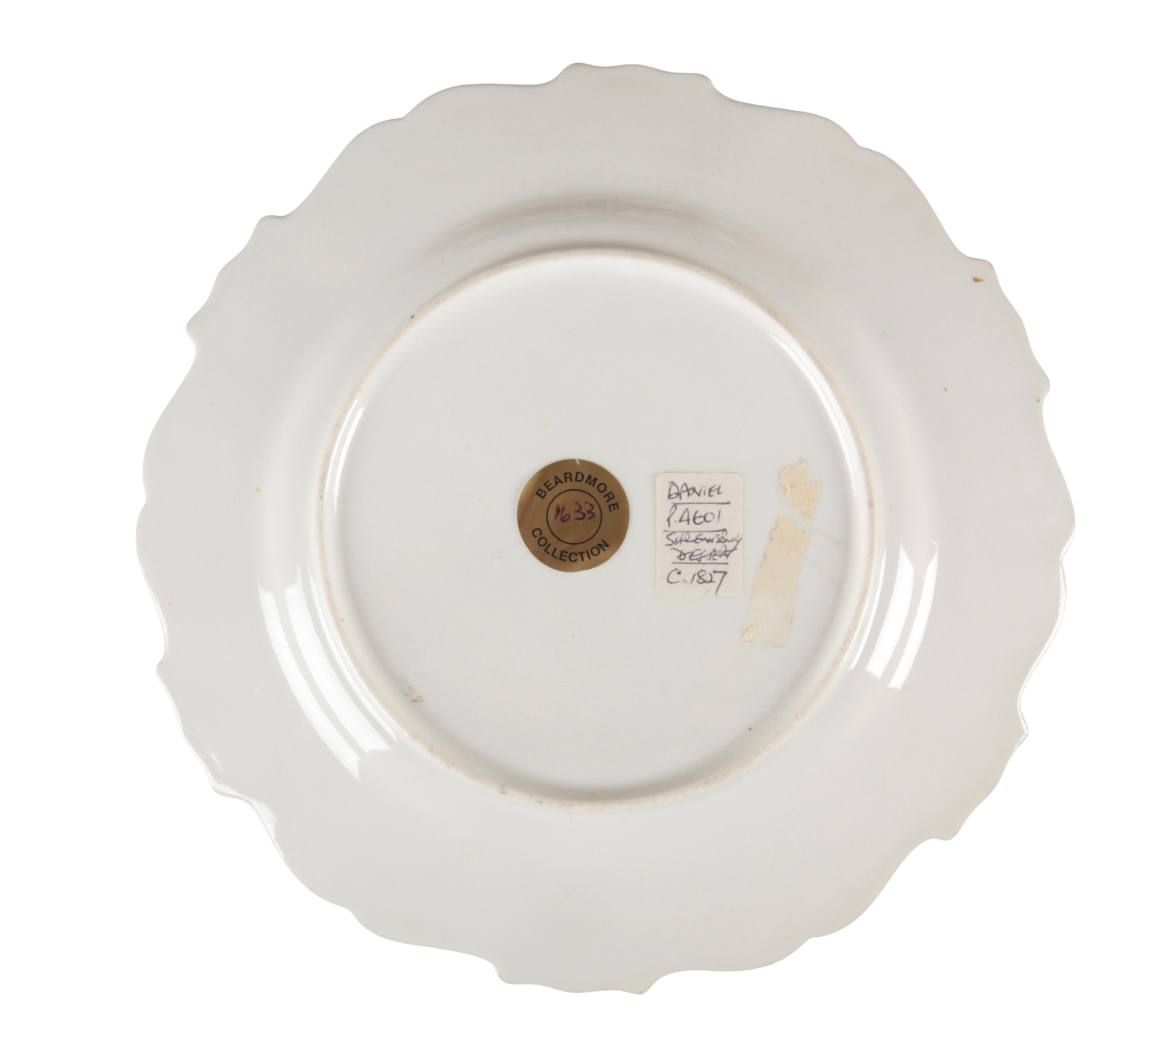 A COLLECTION OF H & R DANIEL SHREWSBURY SHAPE PLATES - Image 6 of 6